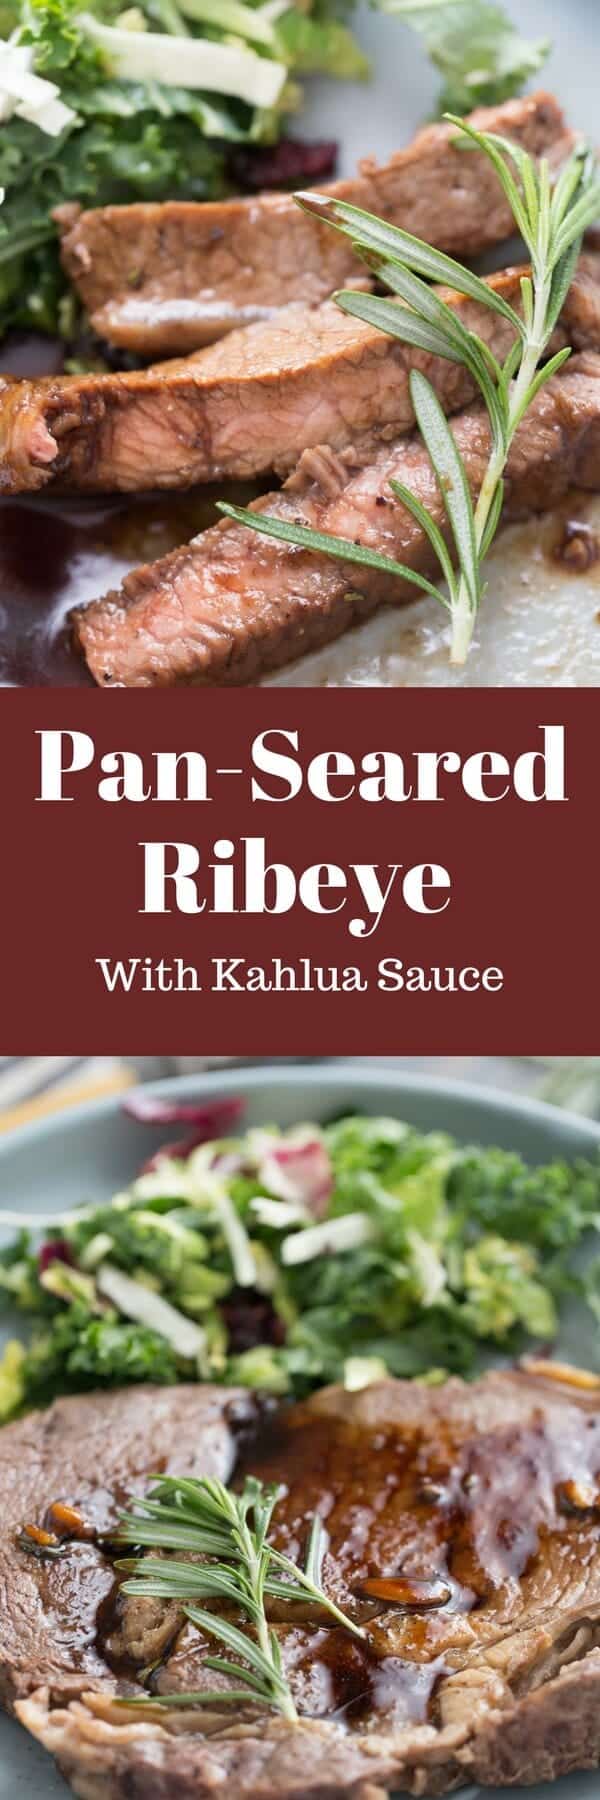 Pan-Seared ribeye steak are lightly seasoned and served with a silky, slightly sweet Kahlua sauce. When you need to impress, this is the meal turn to!